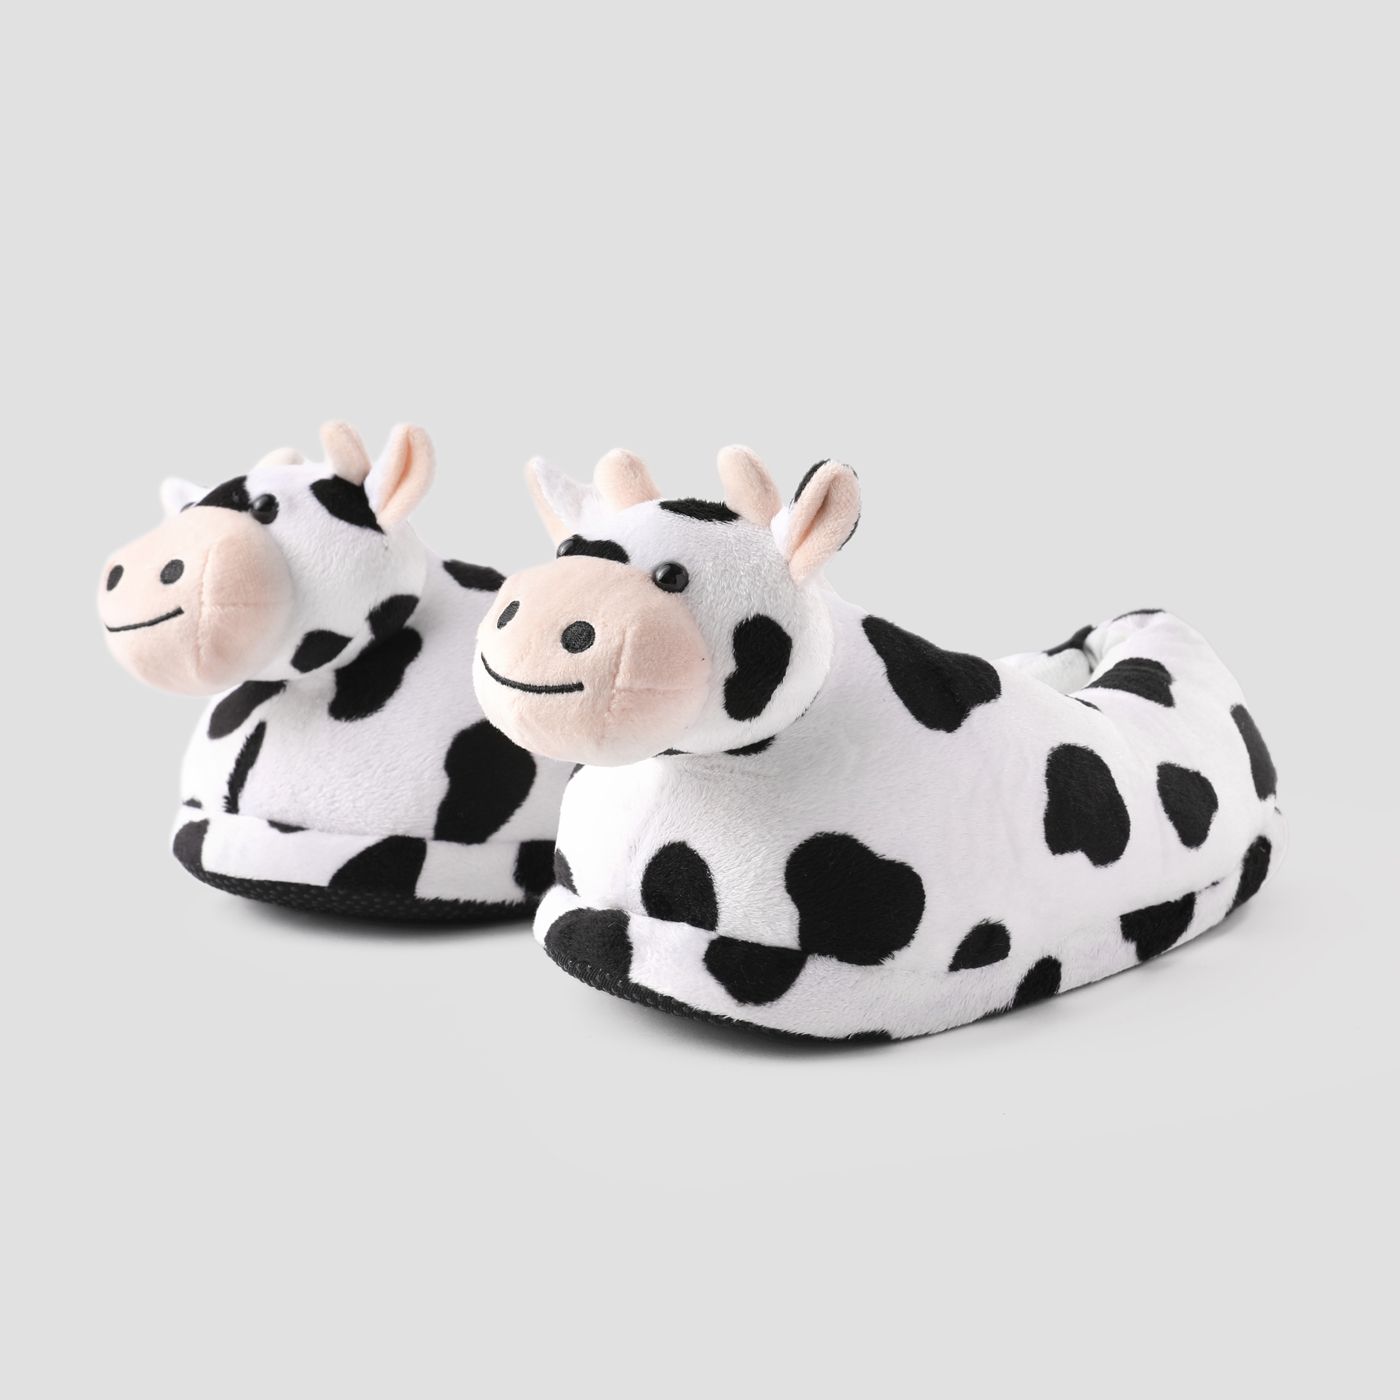 Family Matching Plush Cow Animal Slippers